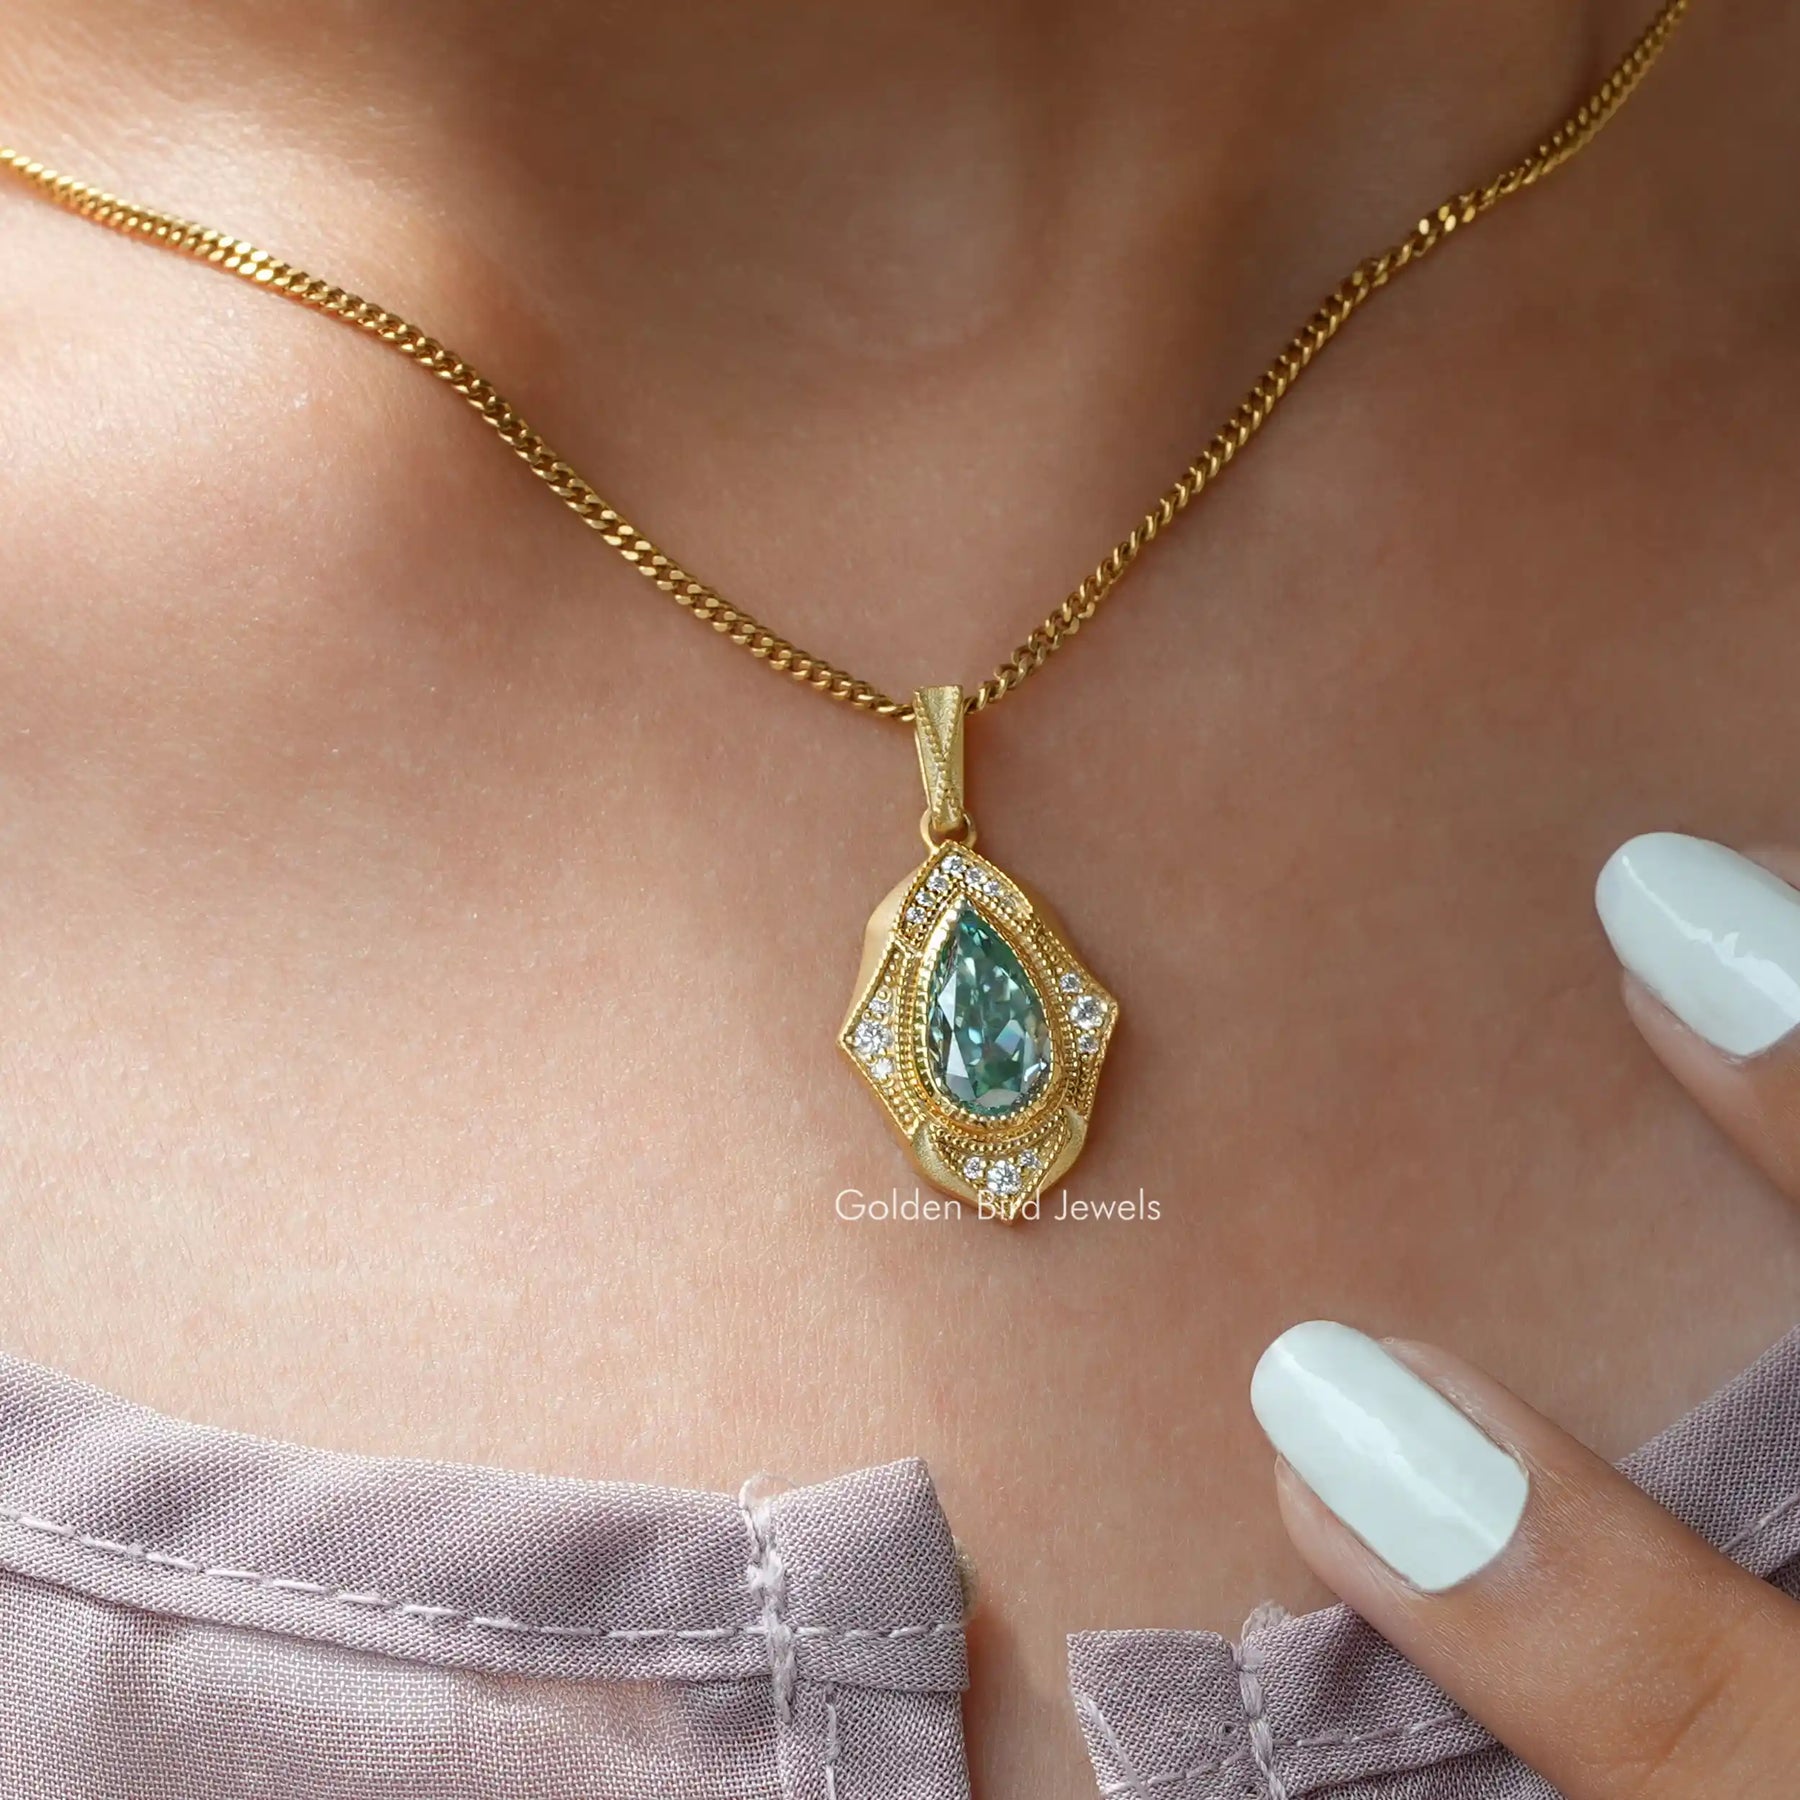 [This moissanite pendant made of yellow gold and round cut side stones]-[Golden Bird Jewels]